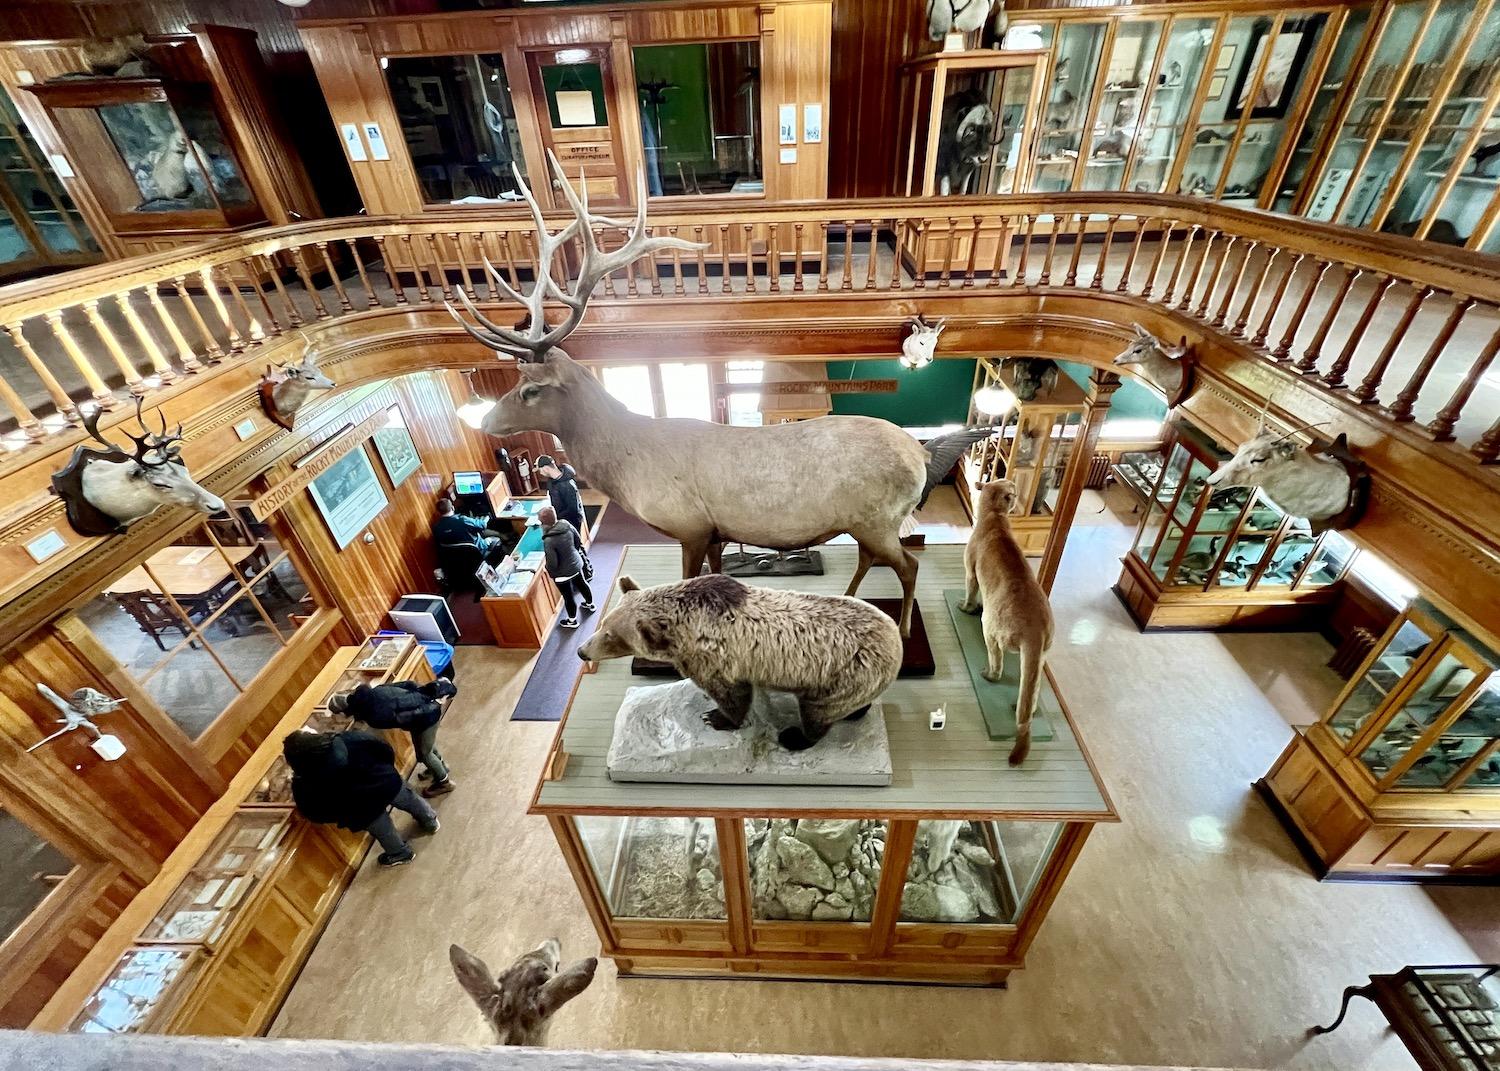 The Banff Park Museum National Historic Site is the oldest natural history museum in western Canada.